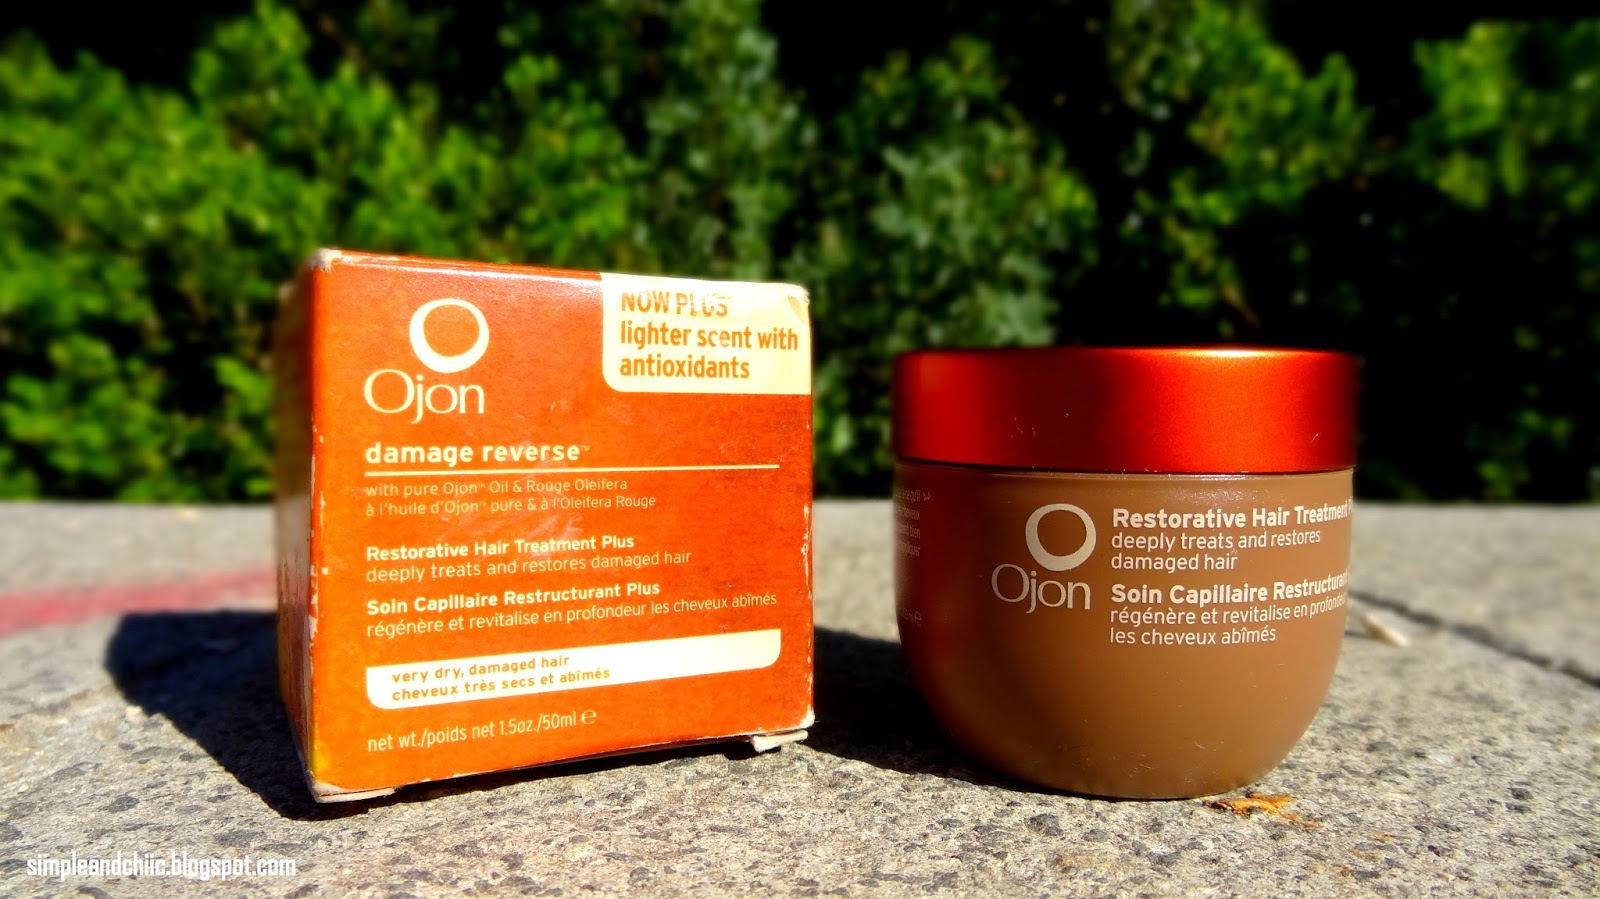 My Review On Ojon Restorative Hair Treatment Plus From The Damage